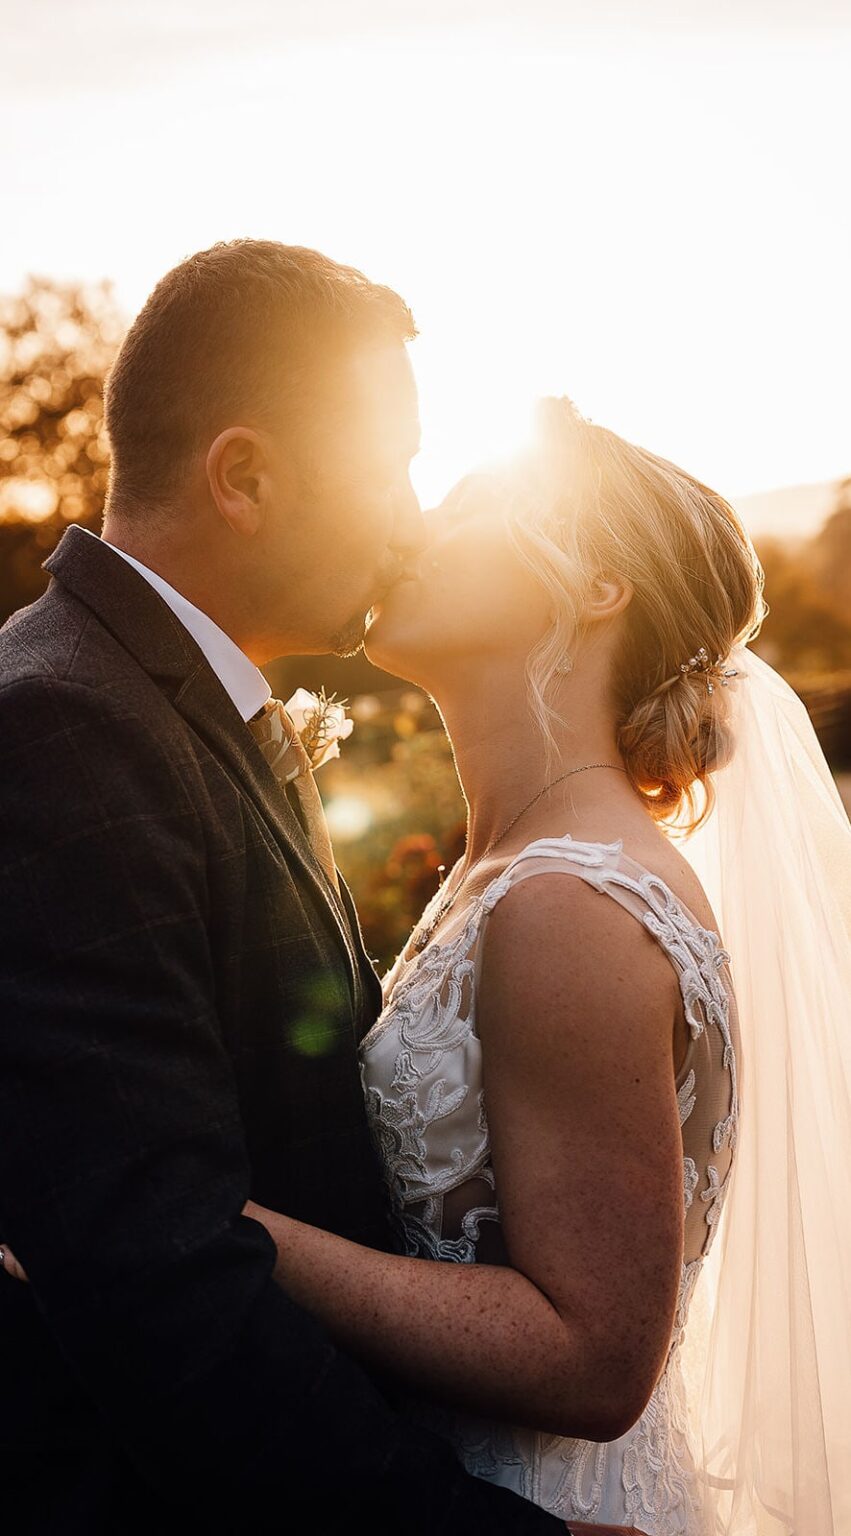 Bride and groom kiss with sun shining behind them